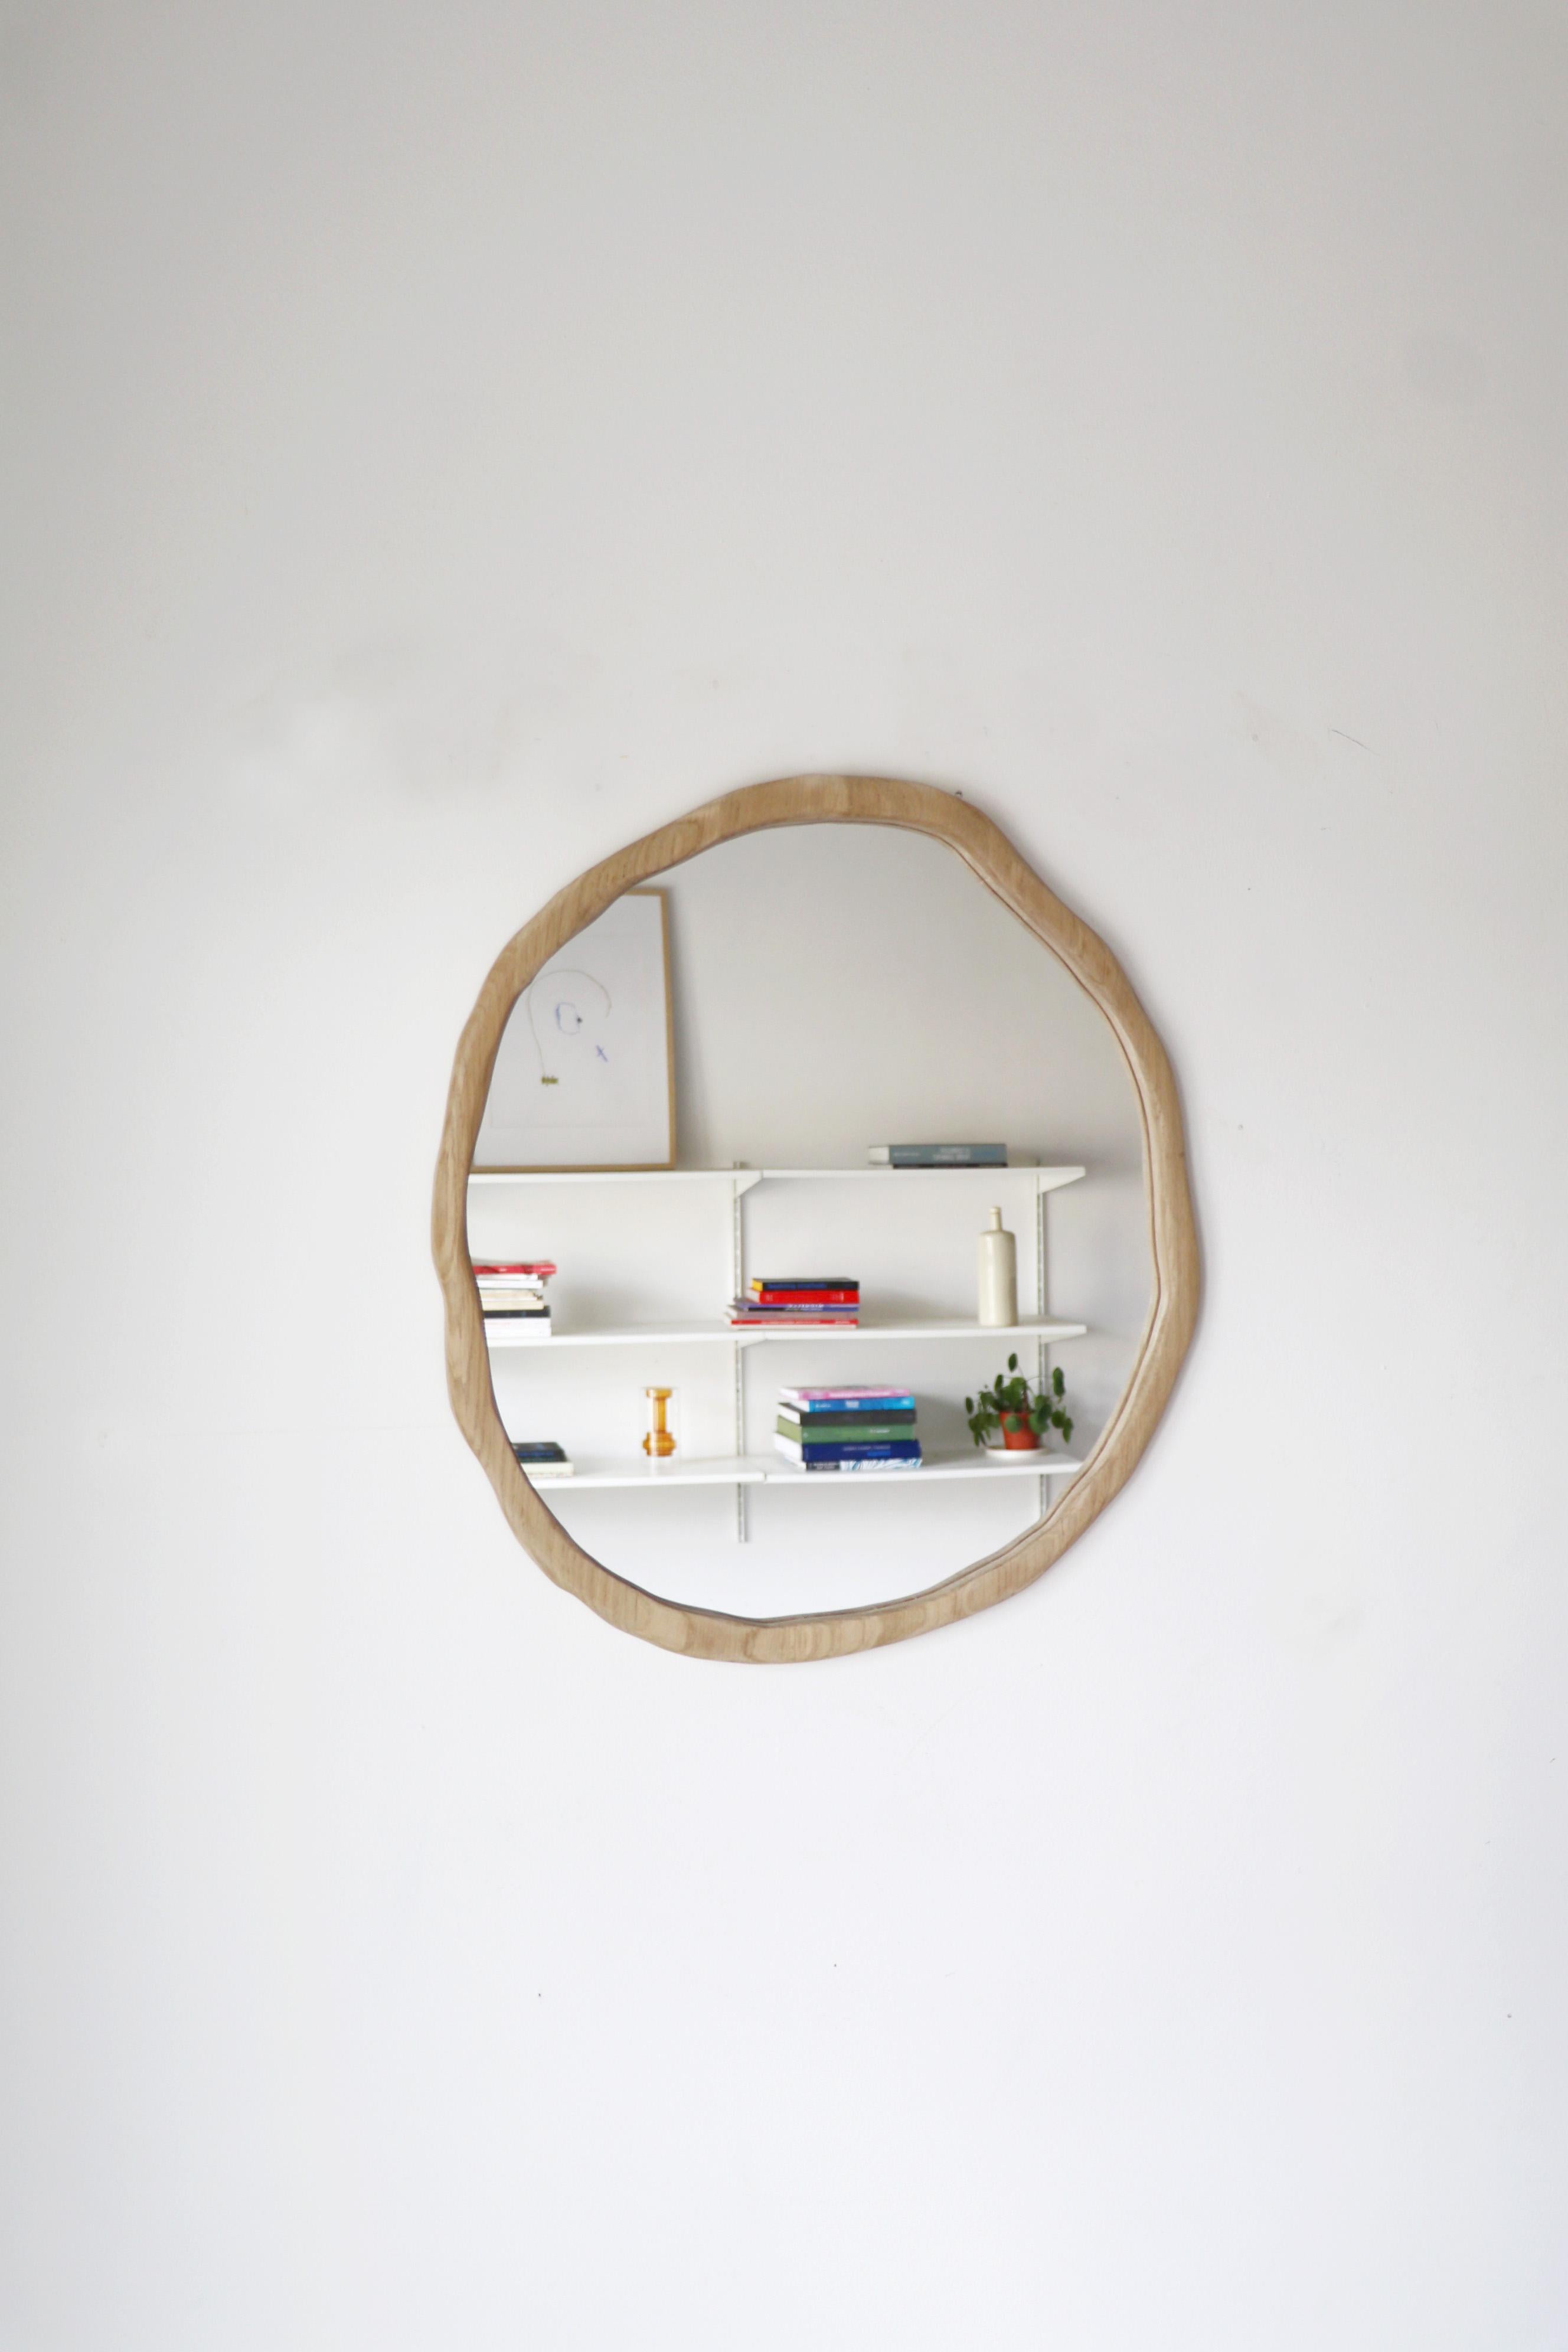 Small ondulation mirror by Alice Lahana Studio
One of a kind.
Dimensions: Ø 45 x H 50 cm.
Materials: Light oak.
Available finishes: Dark and light varnish. 

Every mirror is unique. The shape slightly varies from edition to edition. Please